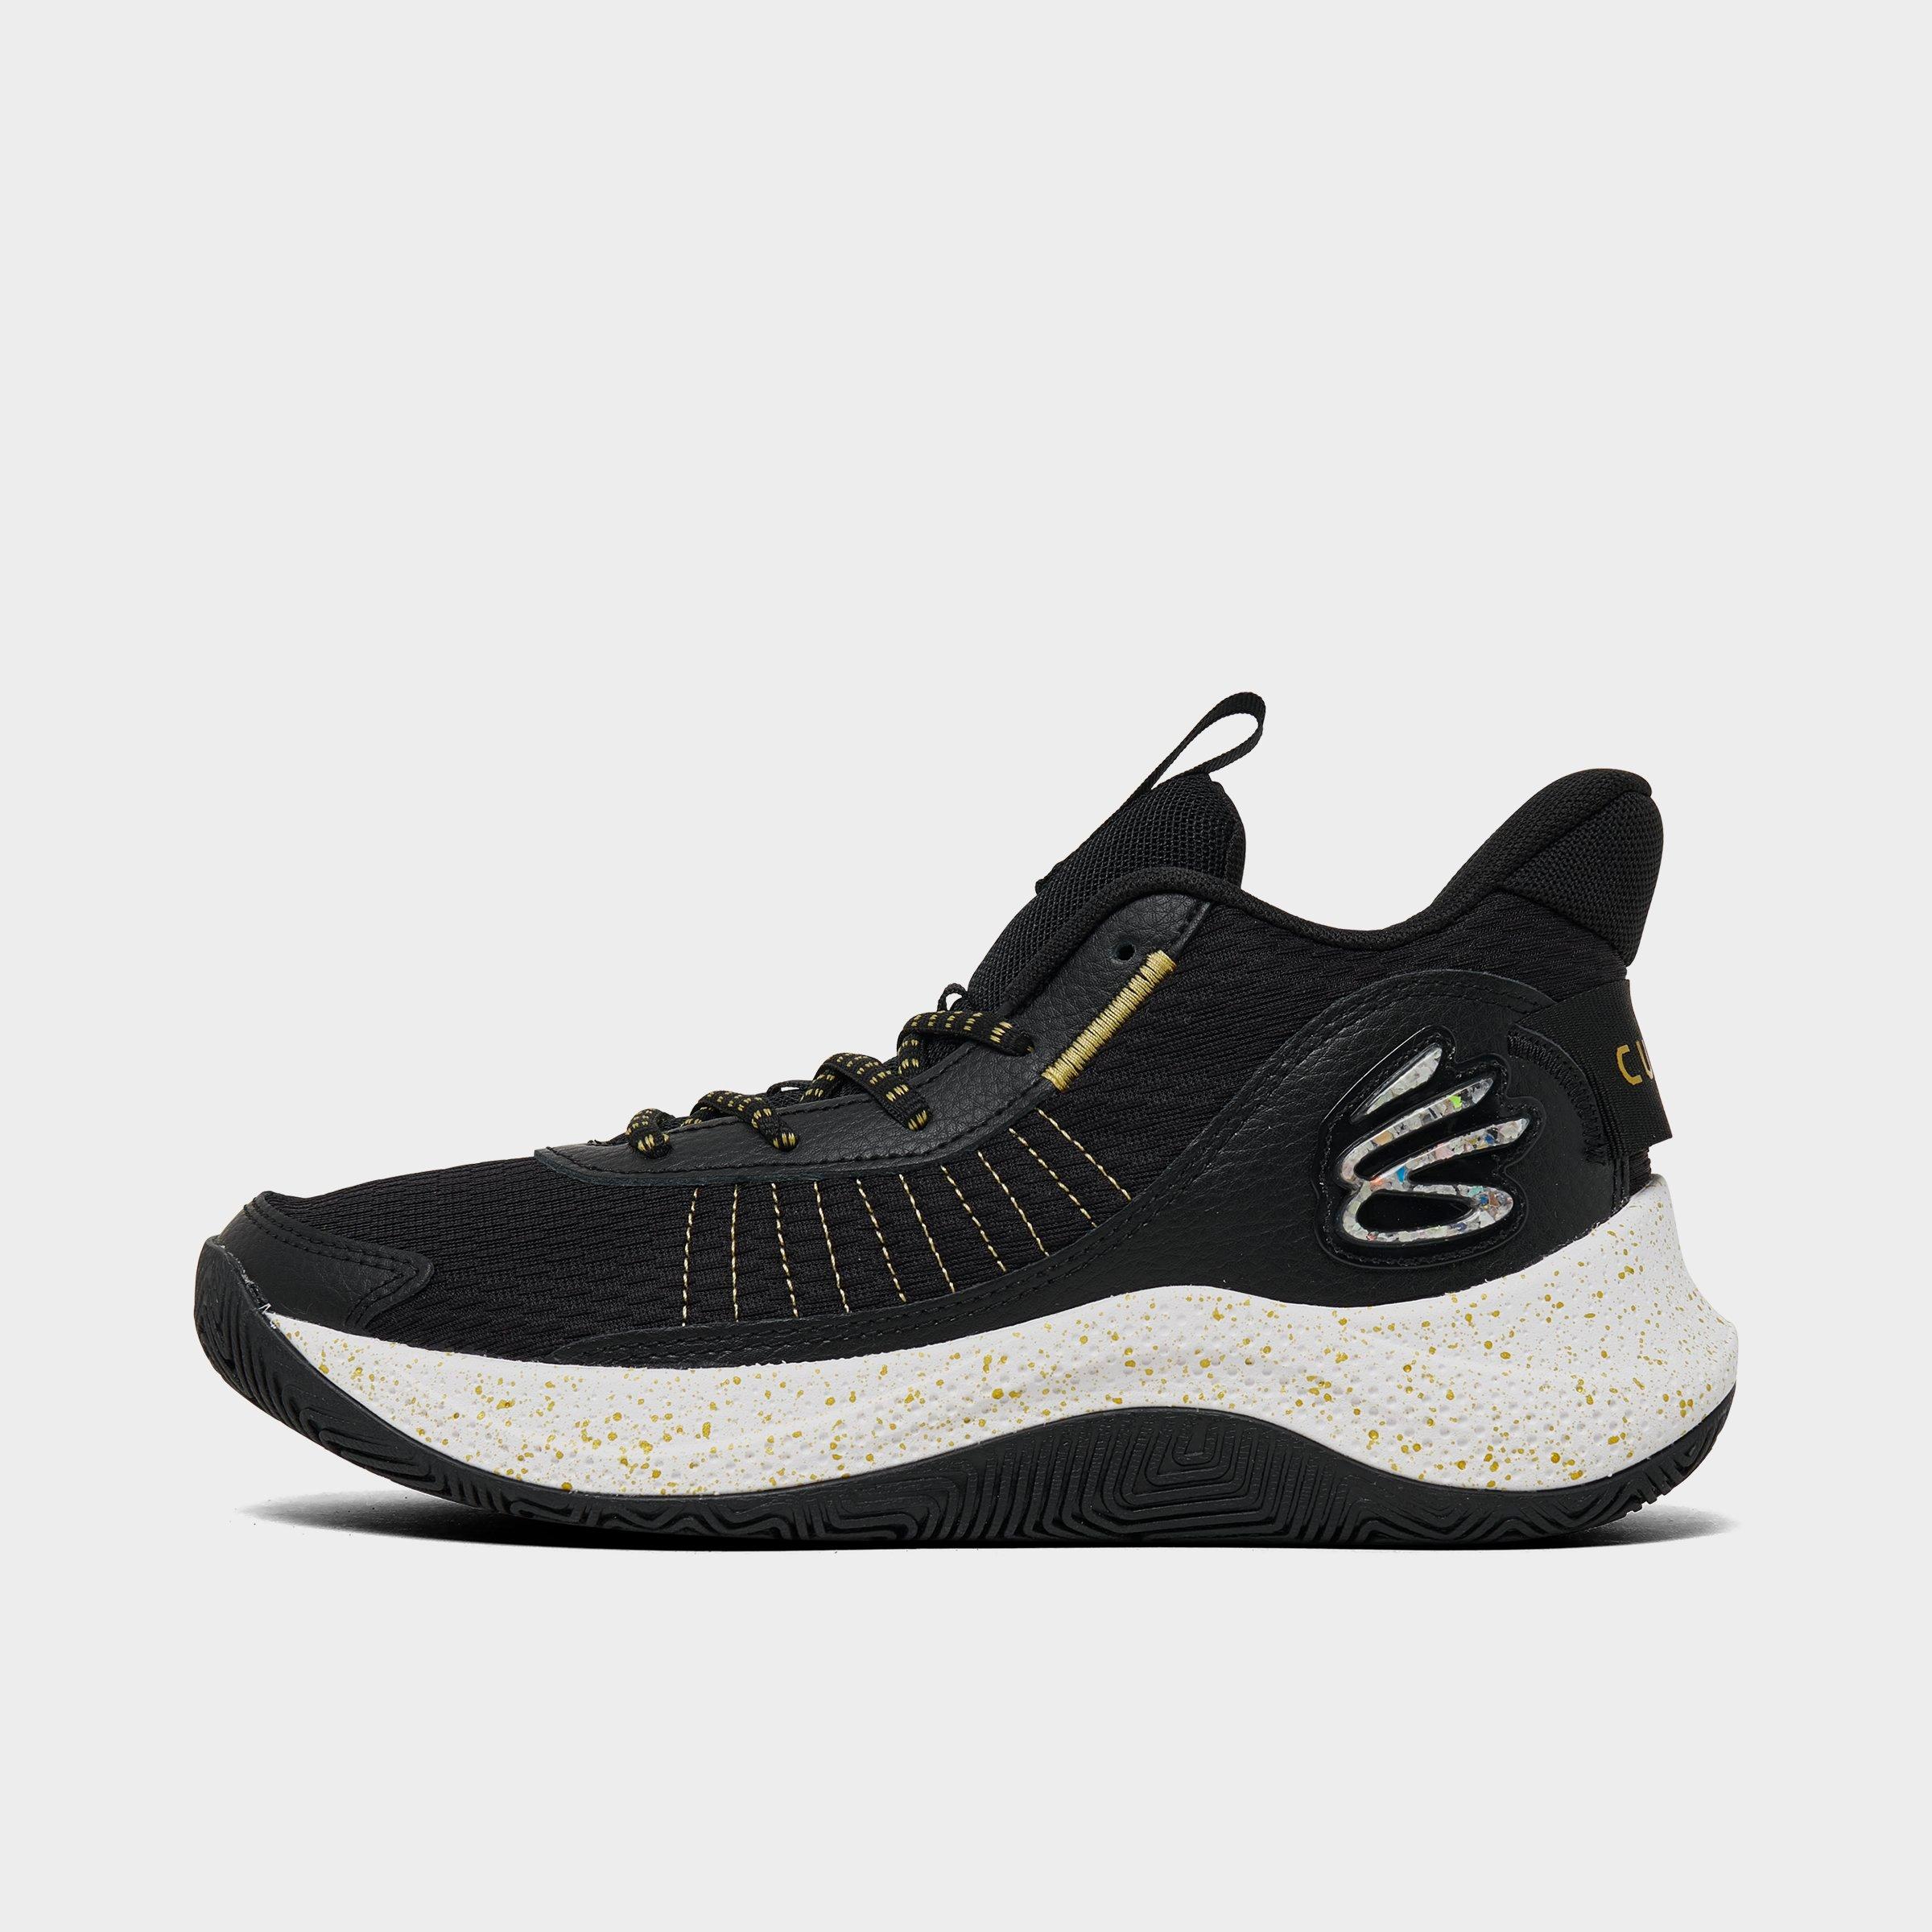 Under Armour Big Kids' Curry 3z7 Basketball Shoes In Black/black ...